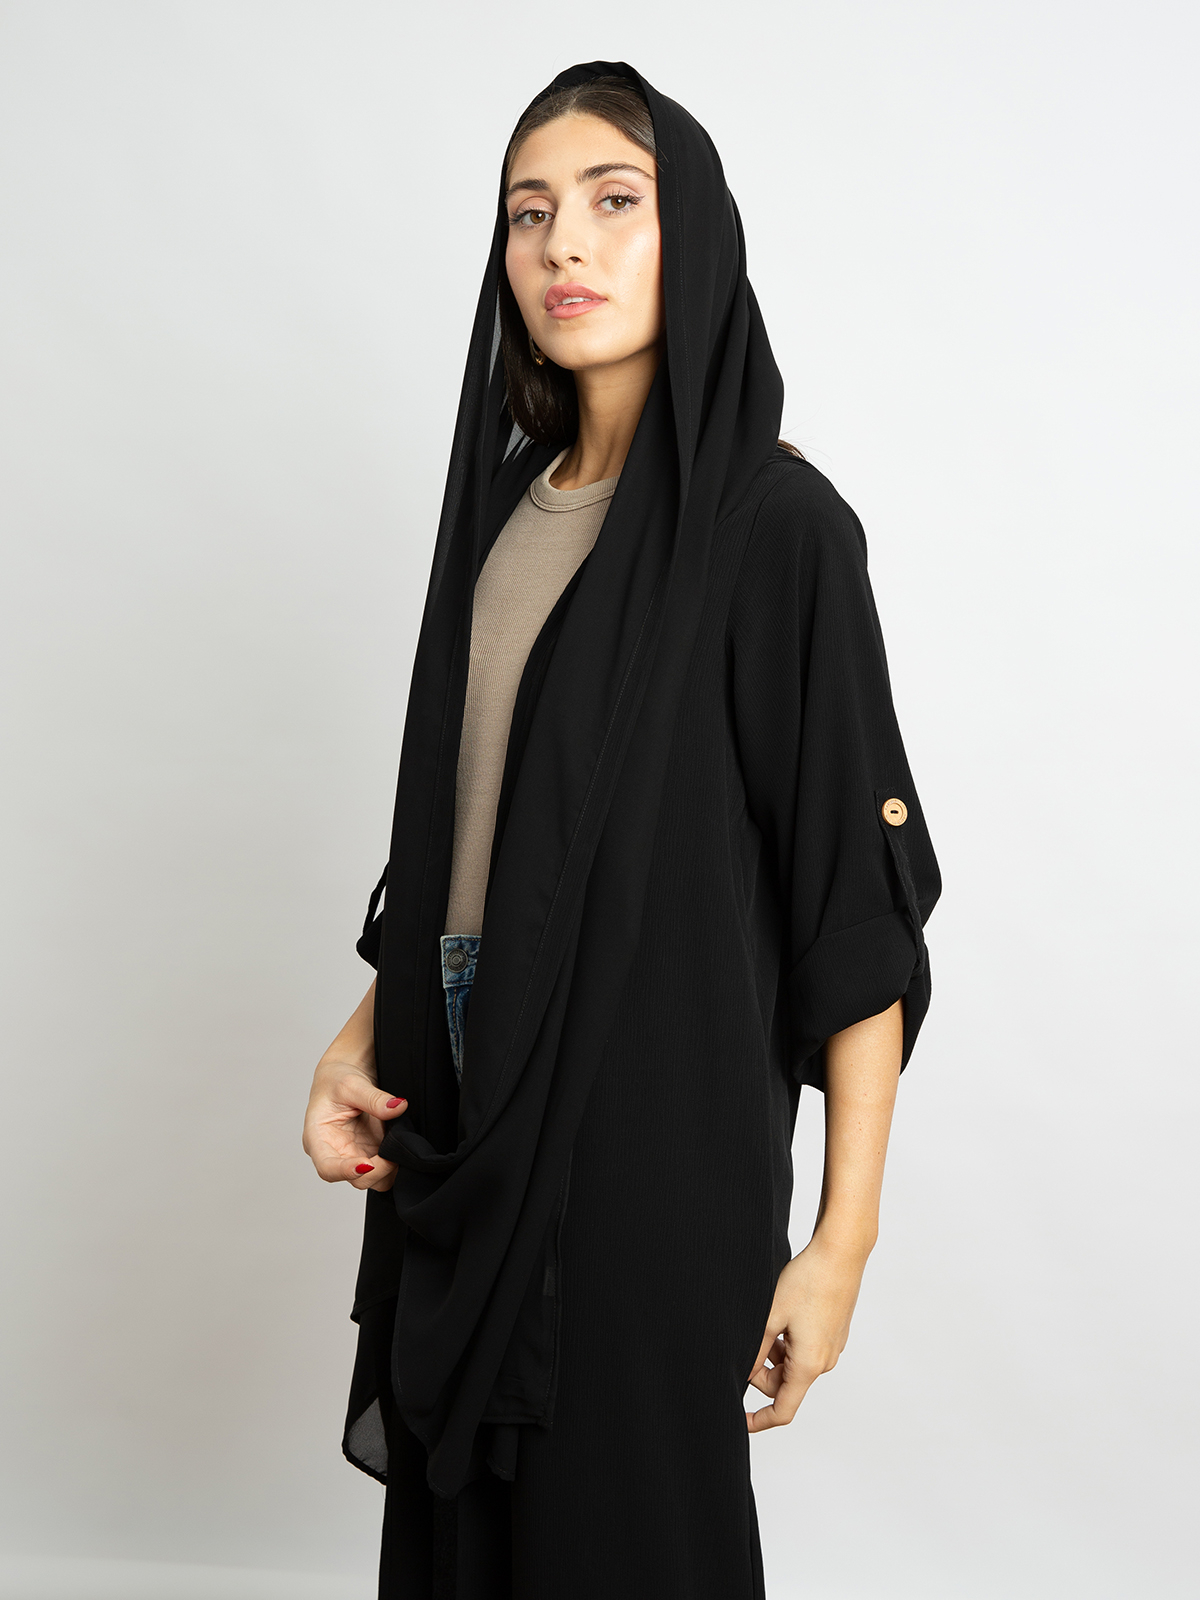 Long open regular fit abaya with hoodie in fancy yoryu fabric black color for work and different activities by kaafmeem